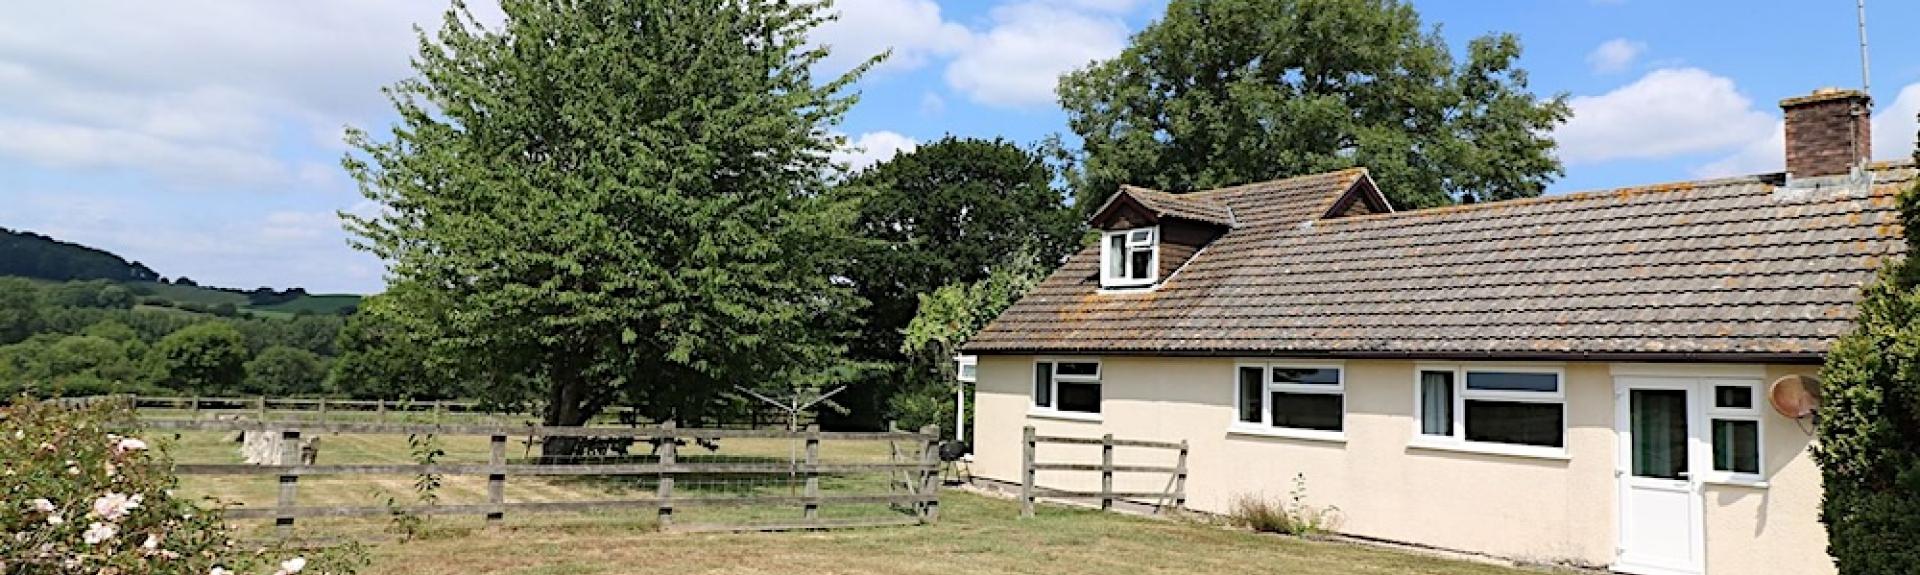 A single-storey Dorset holiday cottage overlooks a large lawn surrounded by a wooden fence, trees and rose bushes.